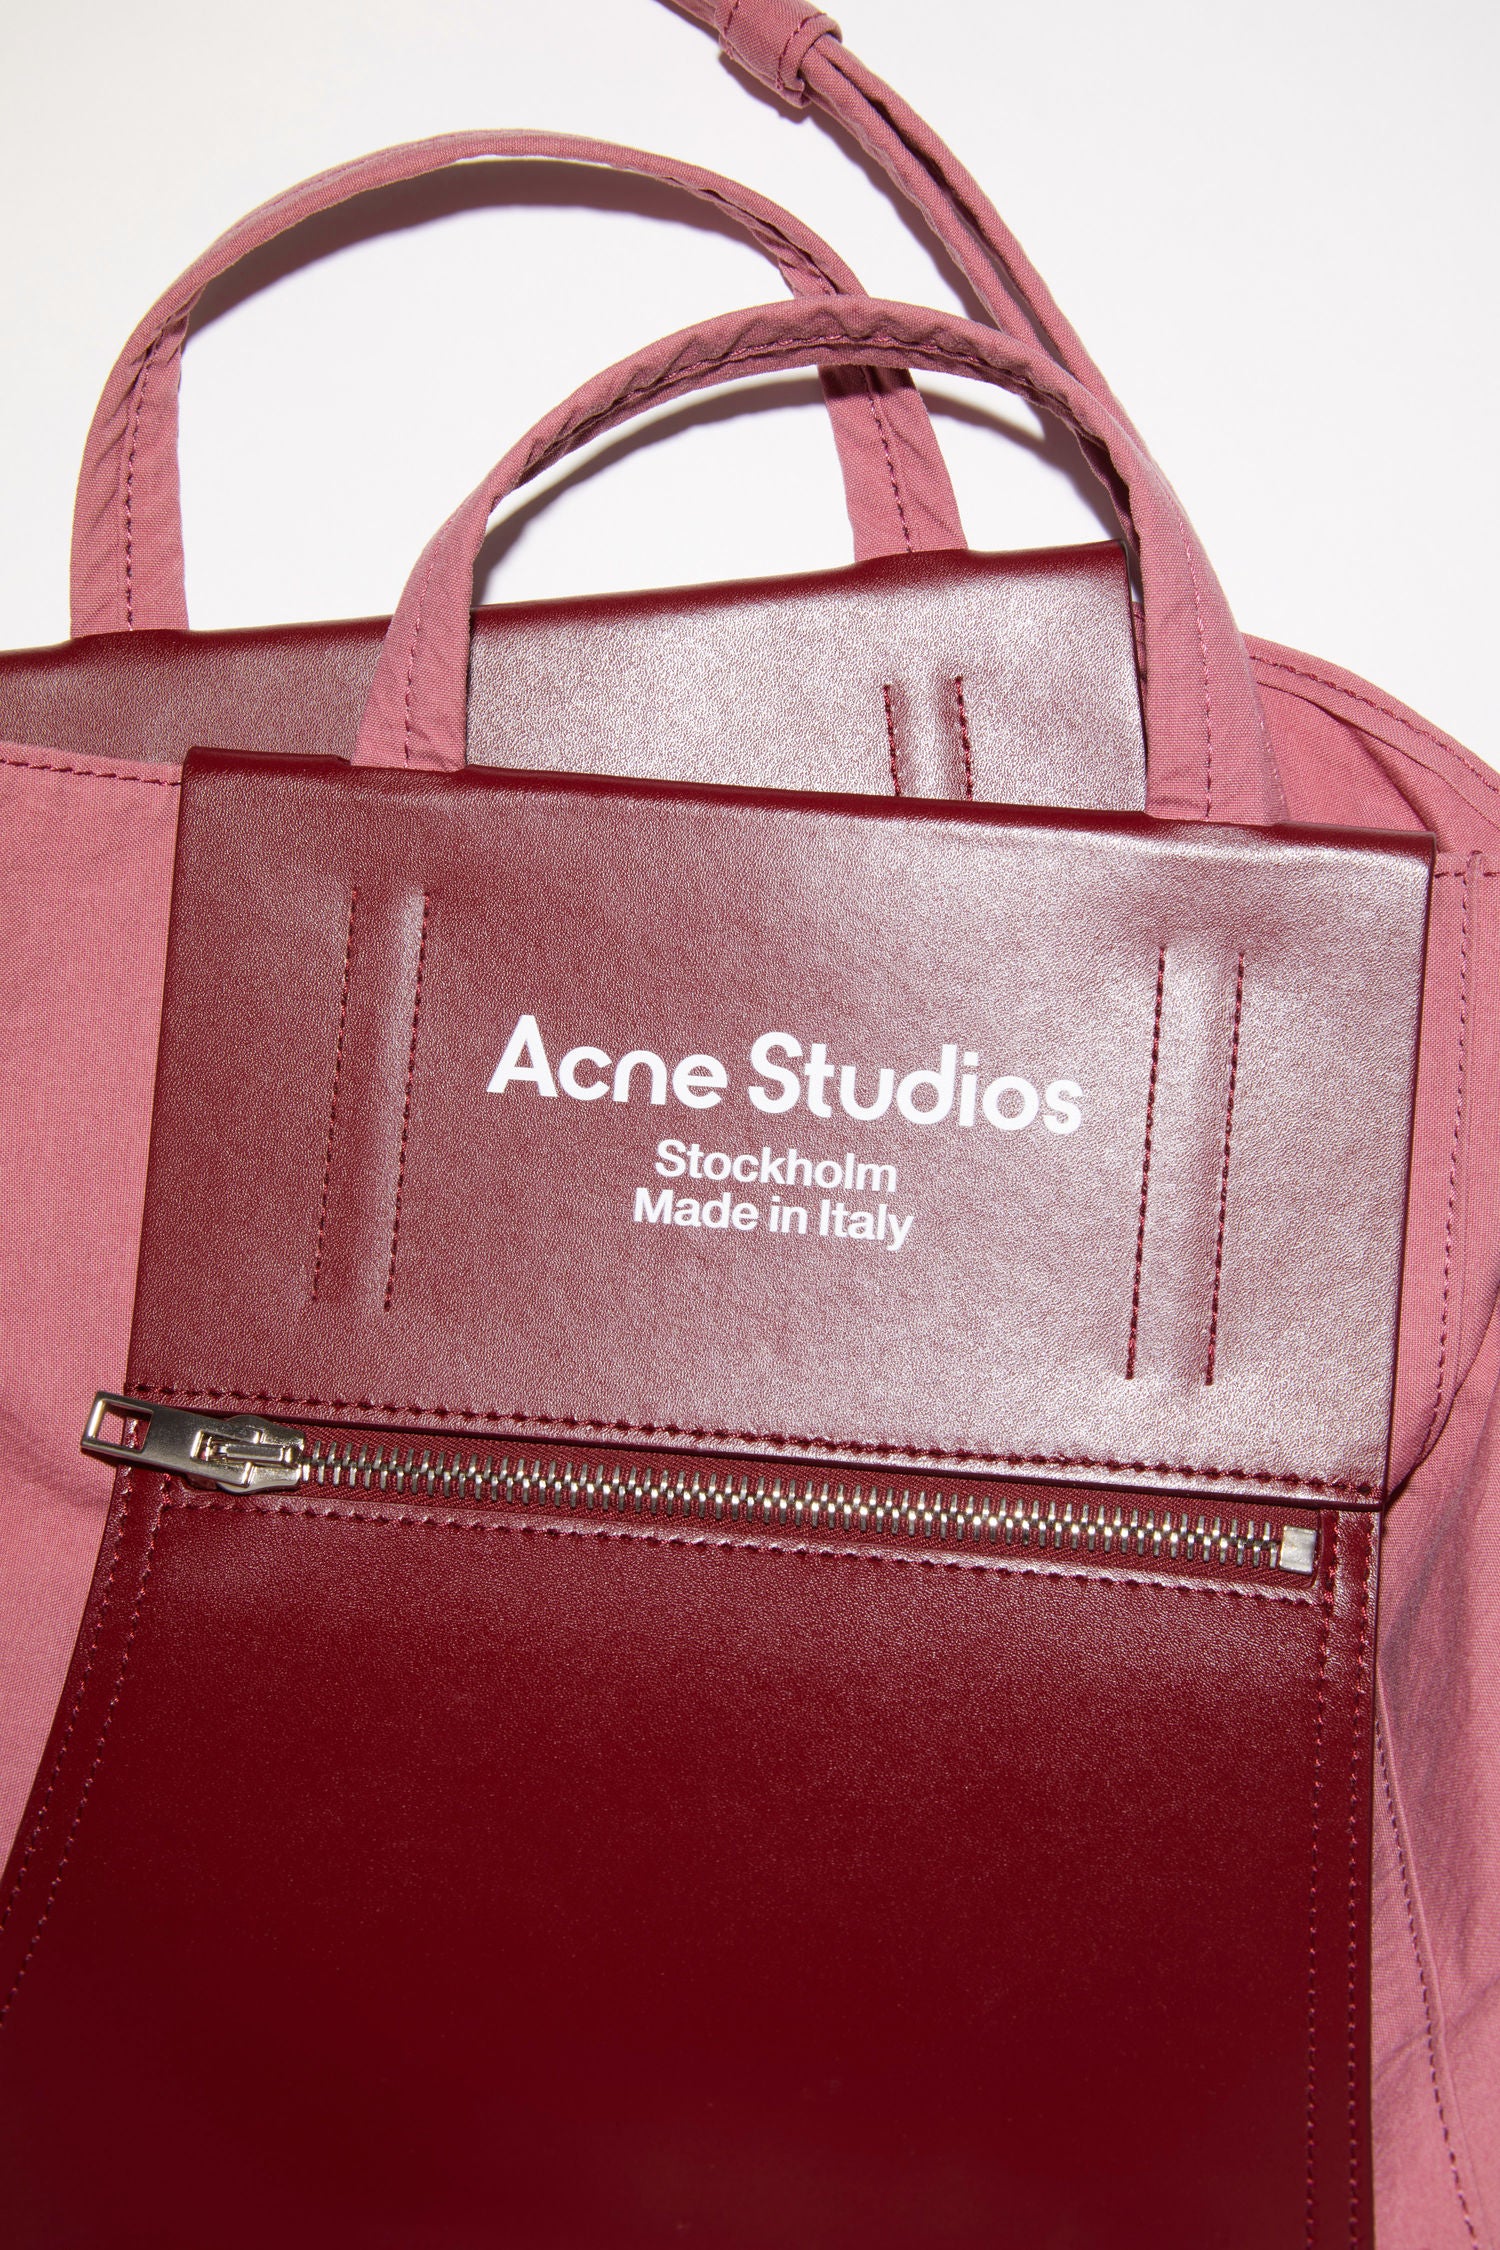 Suit up with Acne Studios